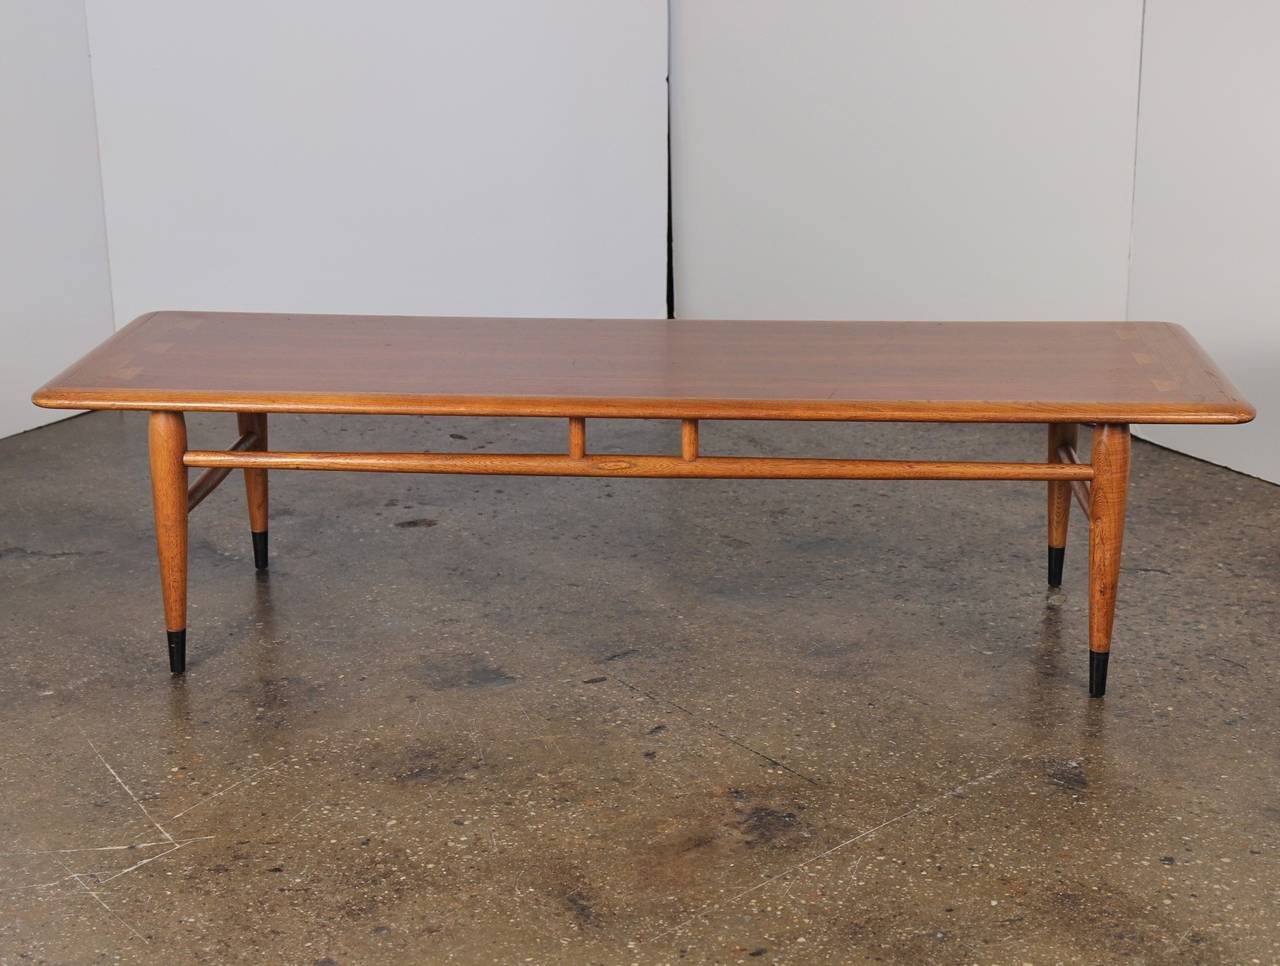 This mid-century coffee table shows off the craftsmanship of its dovetail joints with contrasting tones of wood. At around four-and-a-half feet long, it's the perfect size for the city apartment. In excellent vintage condition. Made by Lane.